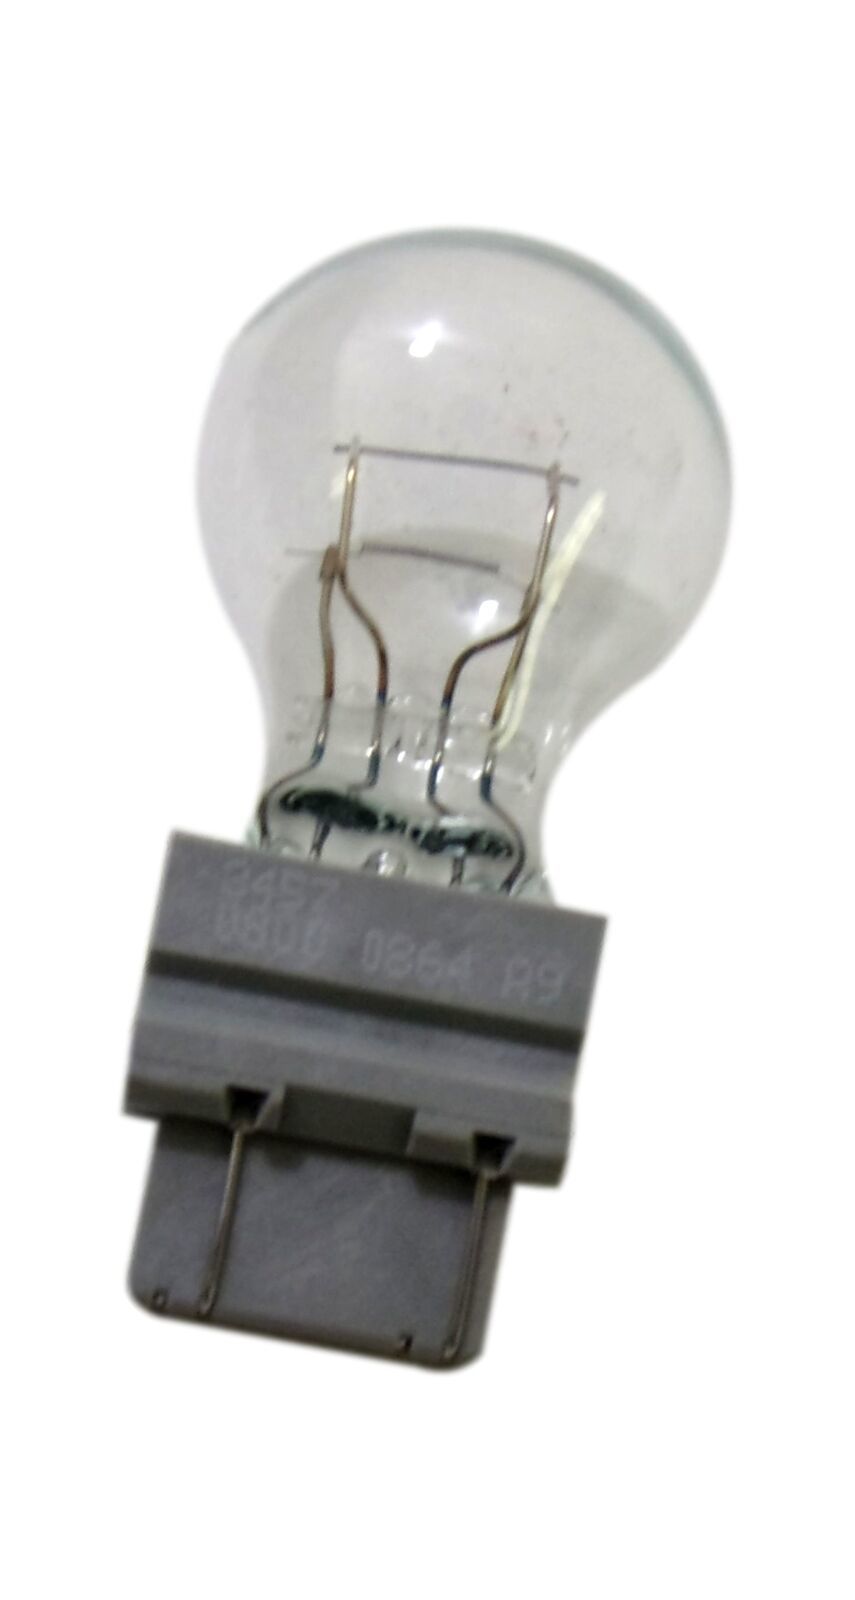 Primary image for Sylvania 3457 800 Light Bulb Signal Lamp